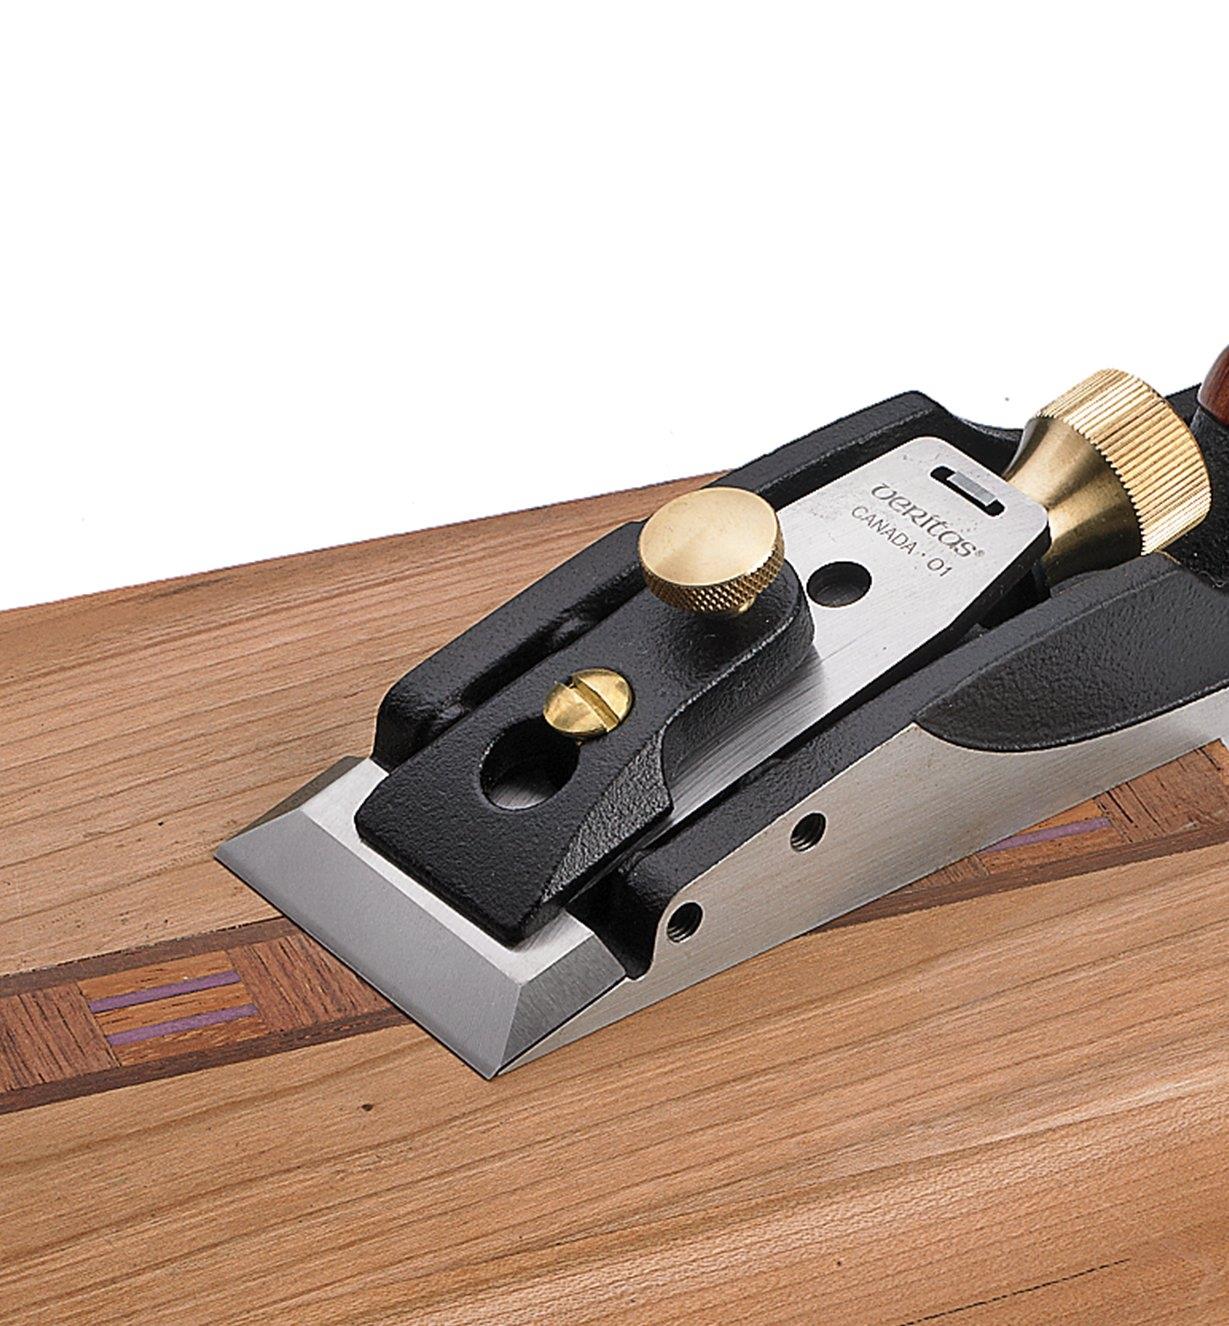 Trimming inlay with the Veritas Cabinetmaker's Trimming Plane